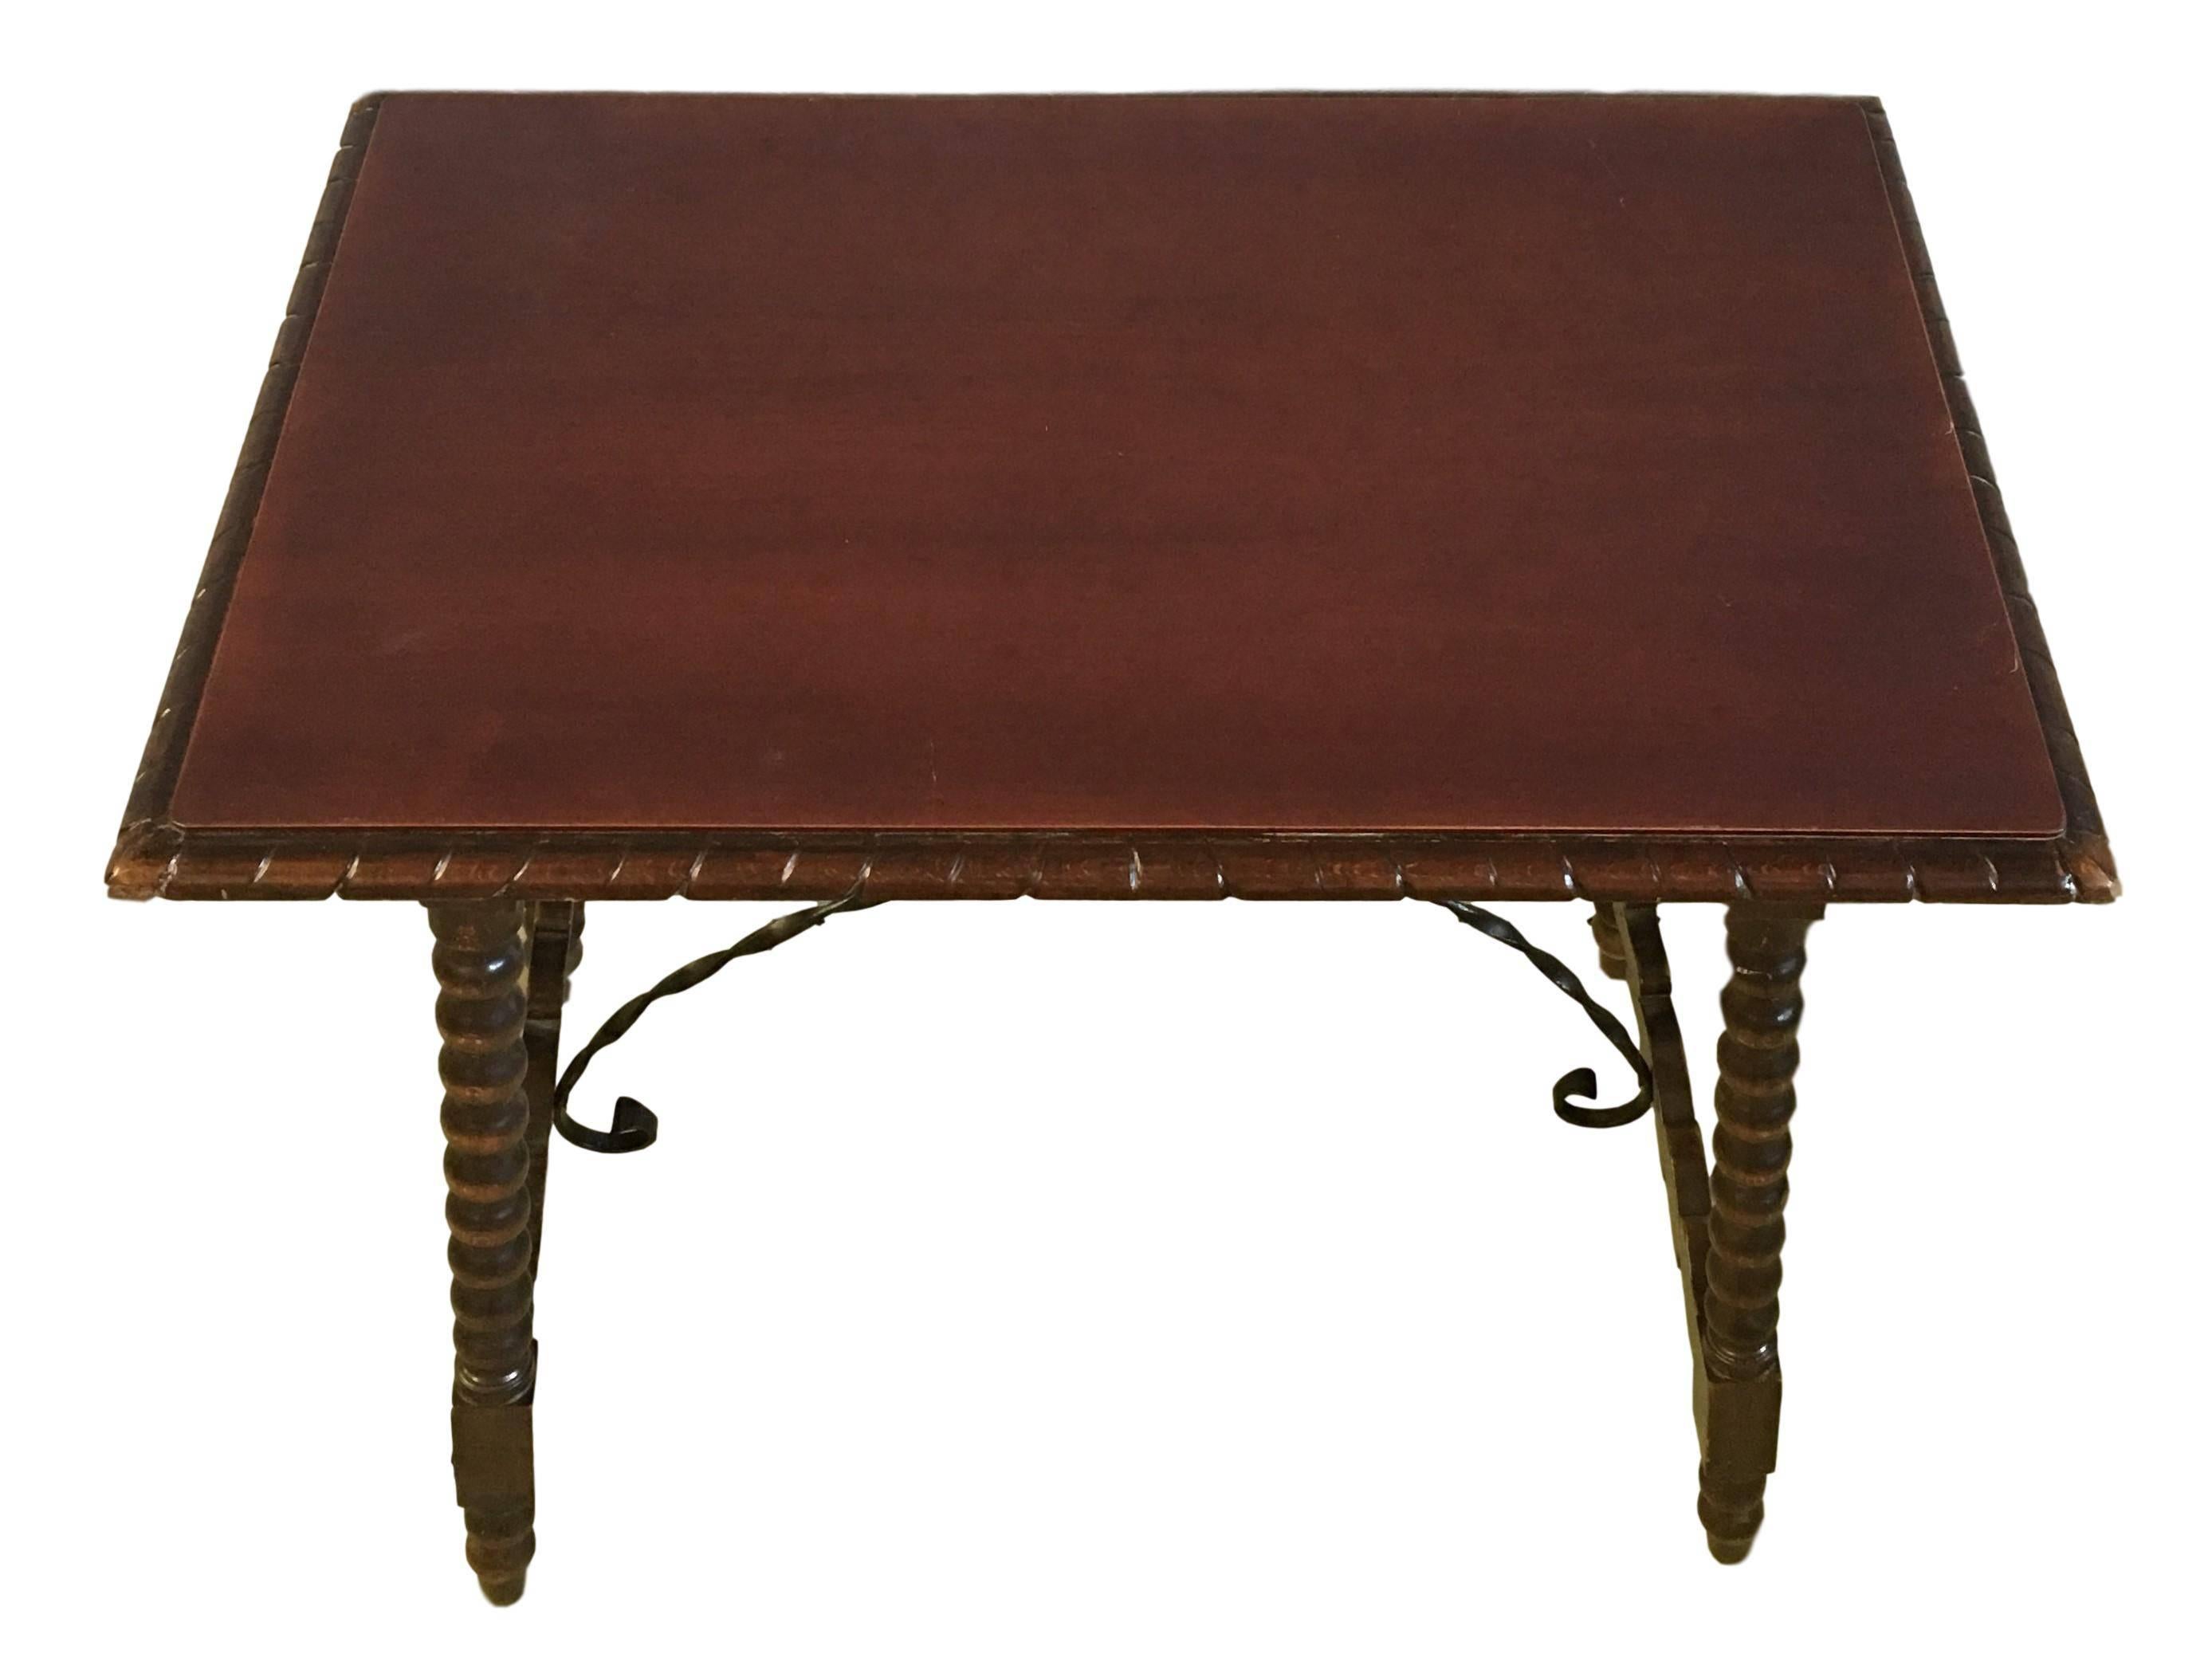 20th century Spanish Baroque ebonized side table with iron stretcher and carved top in walnut.